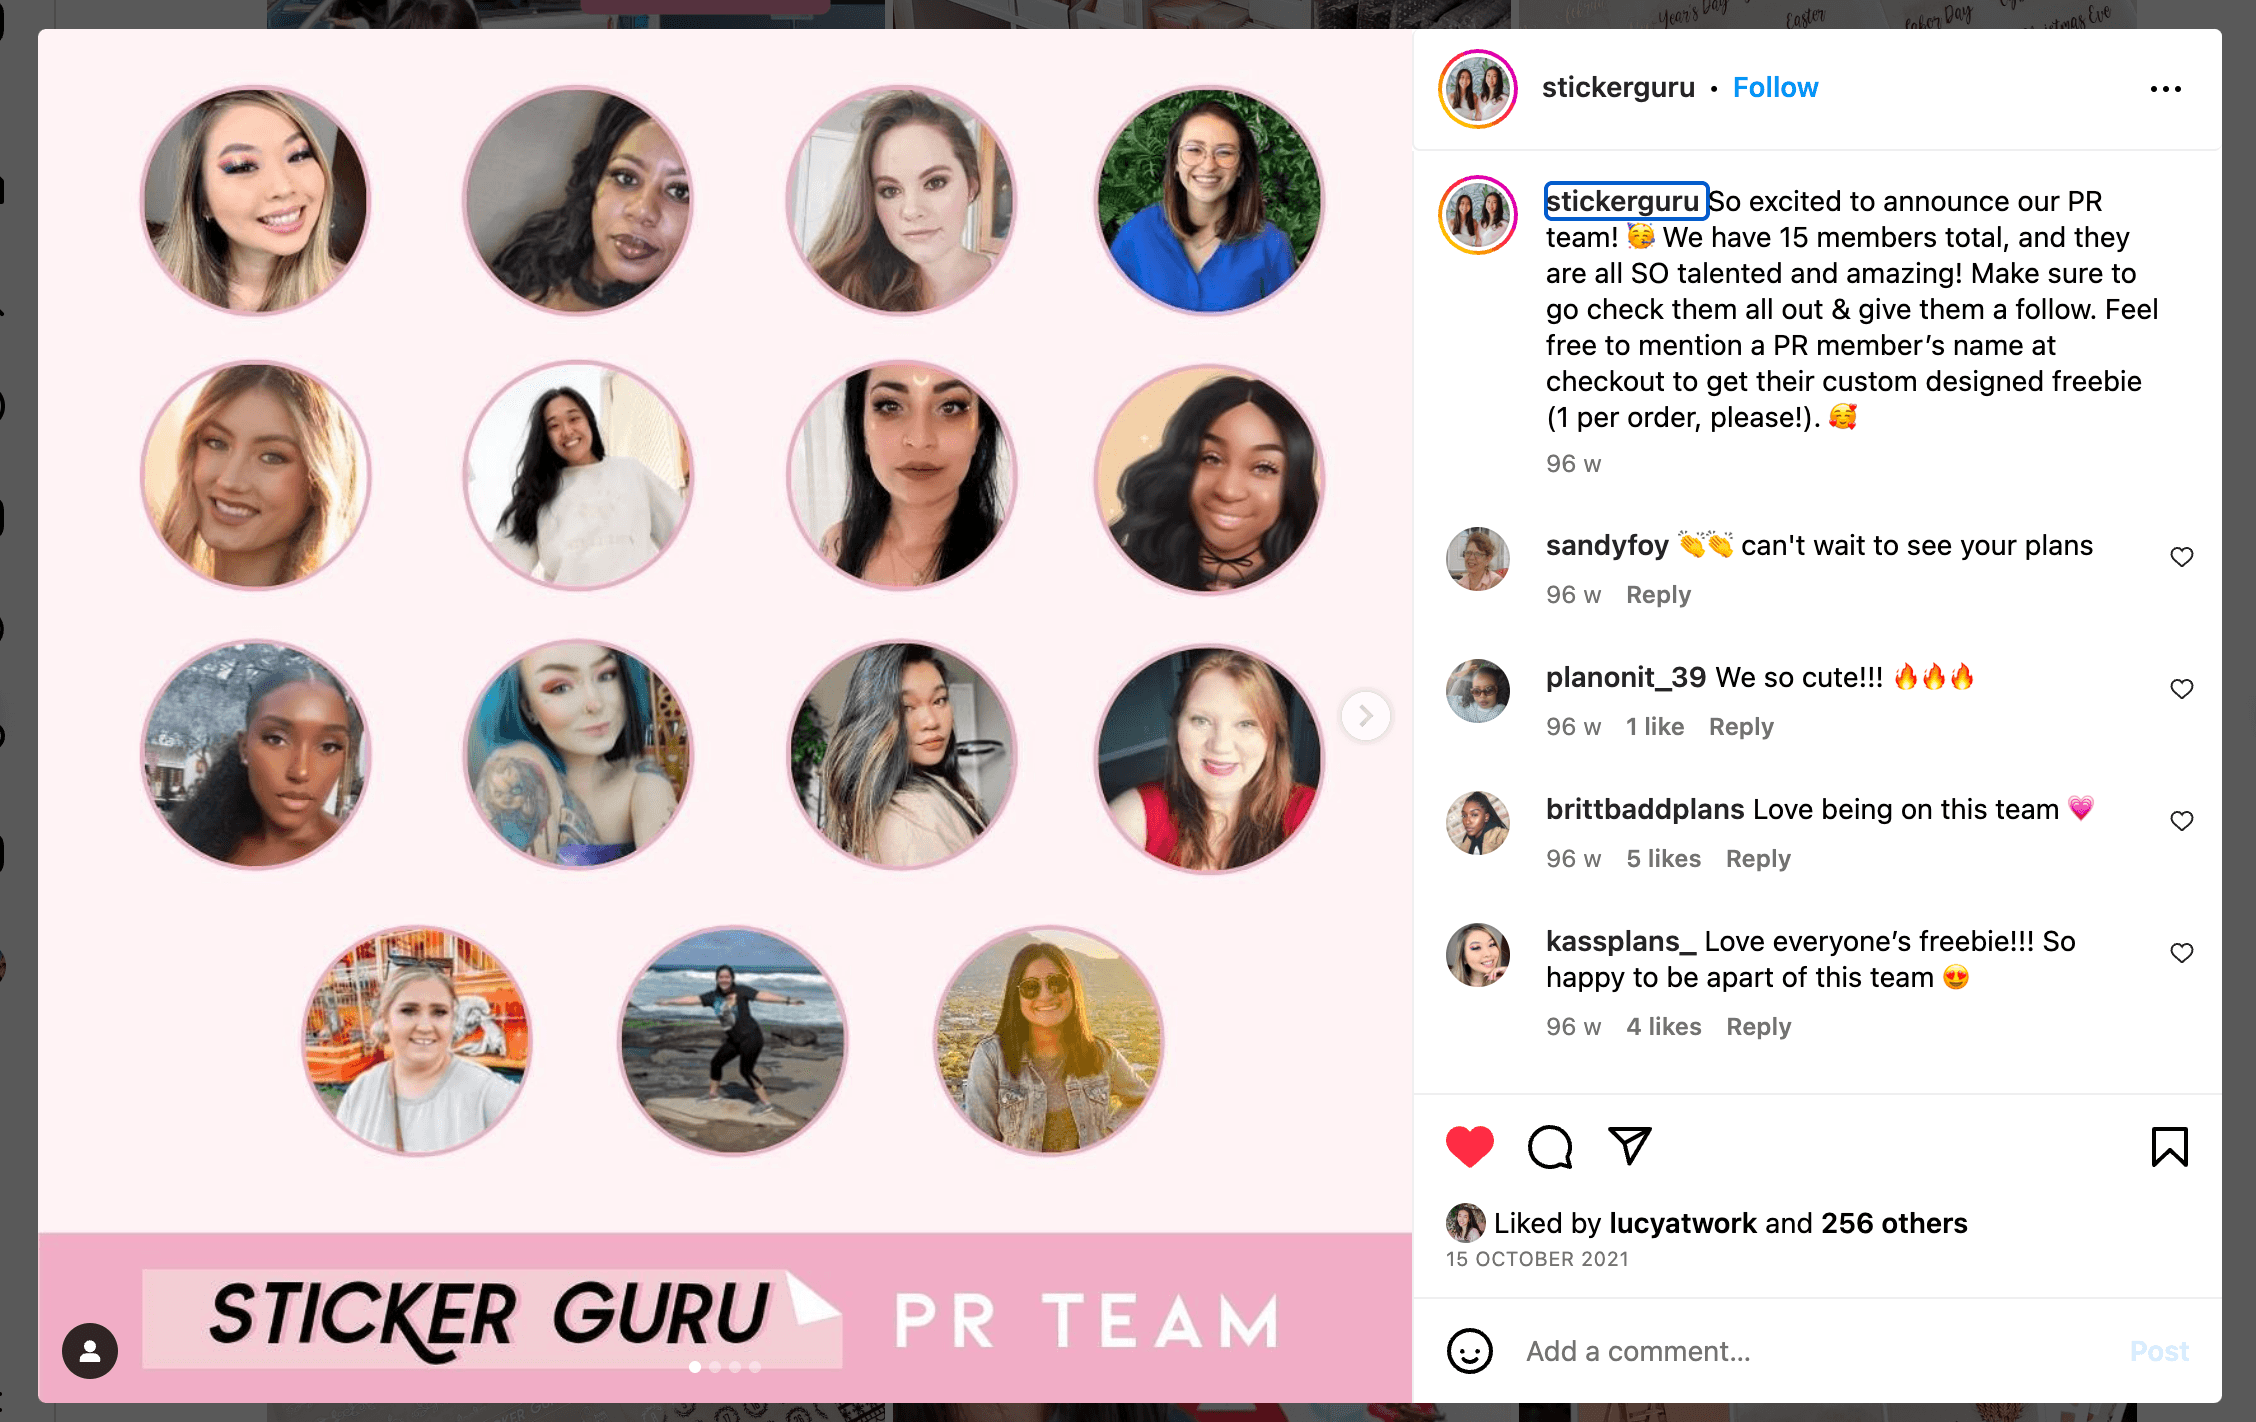 @stickerguru promotes their influencer squad, actively helping their amabssadors' careers